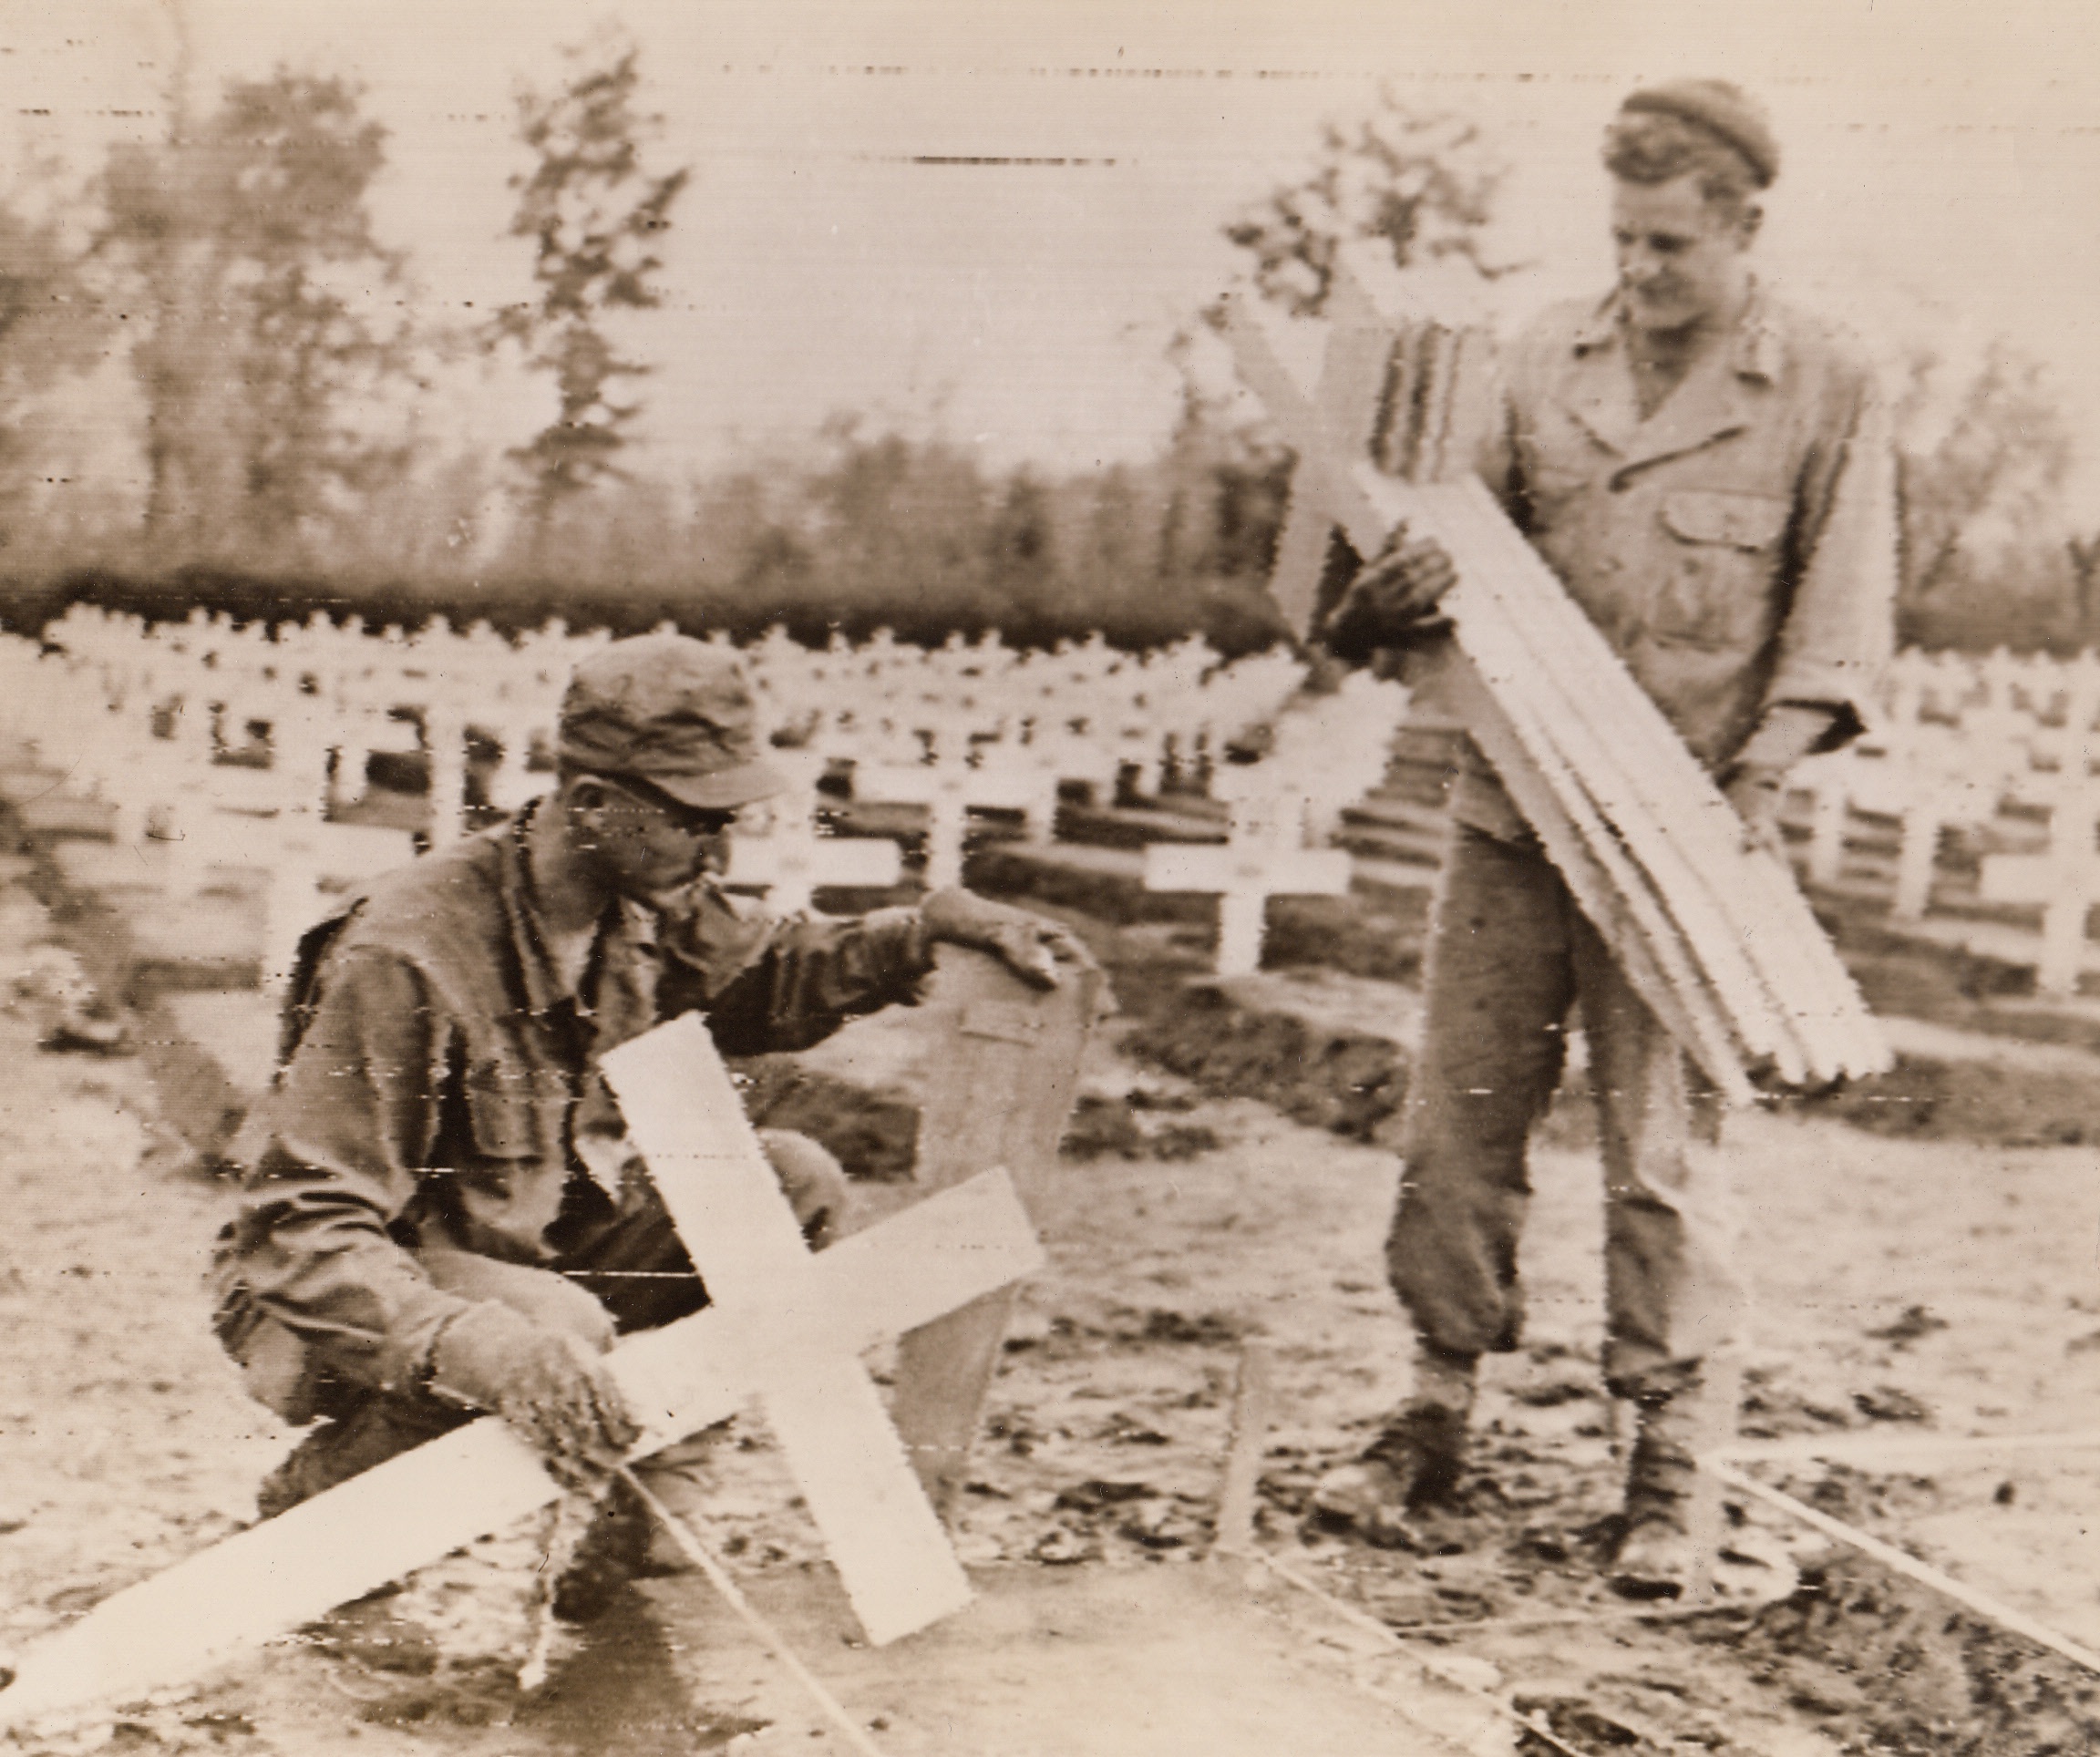 White Crosses Mark Our Graves In Italy, 12/11/1943. Italy –Row upon row of neat white crosses mark the graves of U.S. fighting men who are buried in Italy. Here, two American soldiers replace the temporary markers with the crosses and identification tags. 12/11/43 Credit (U.S. Signal Corps Raidiotelephoto From ACME);